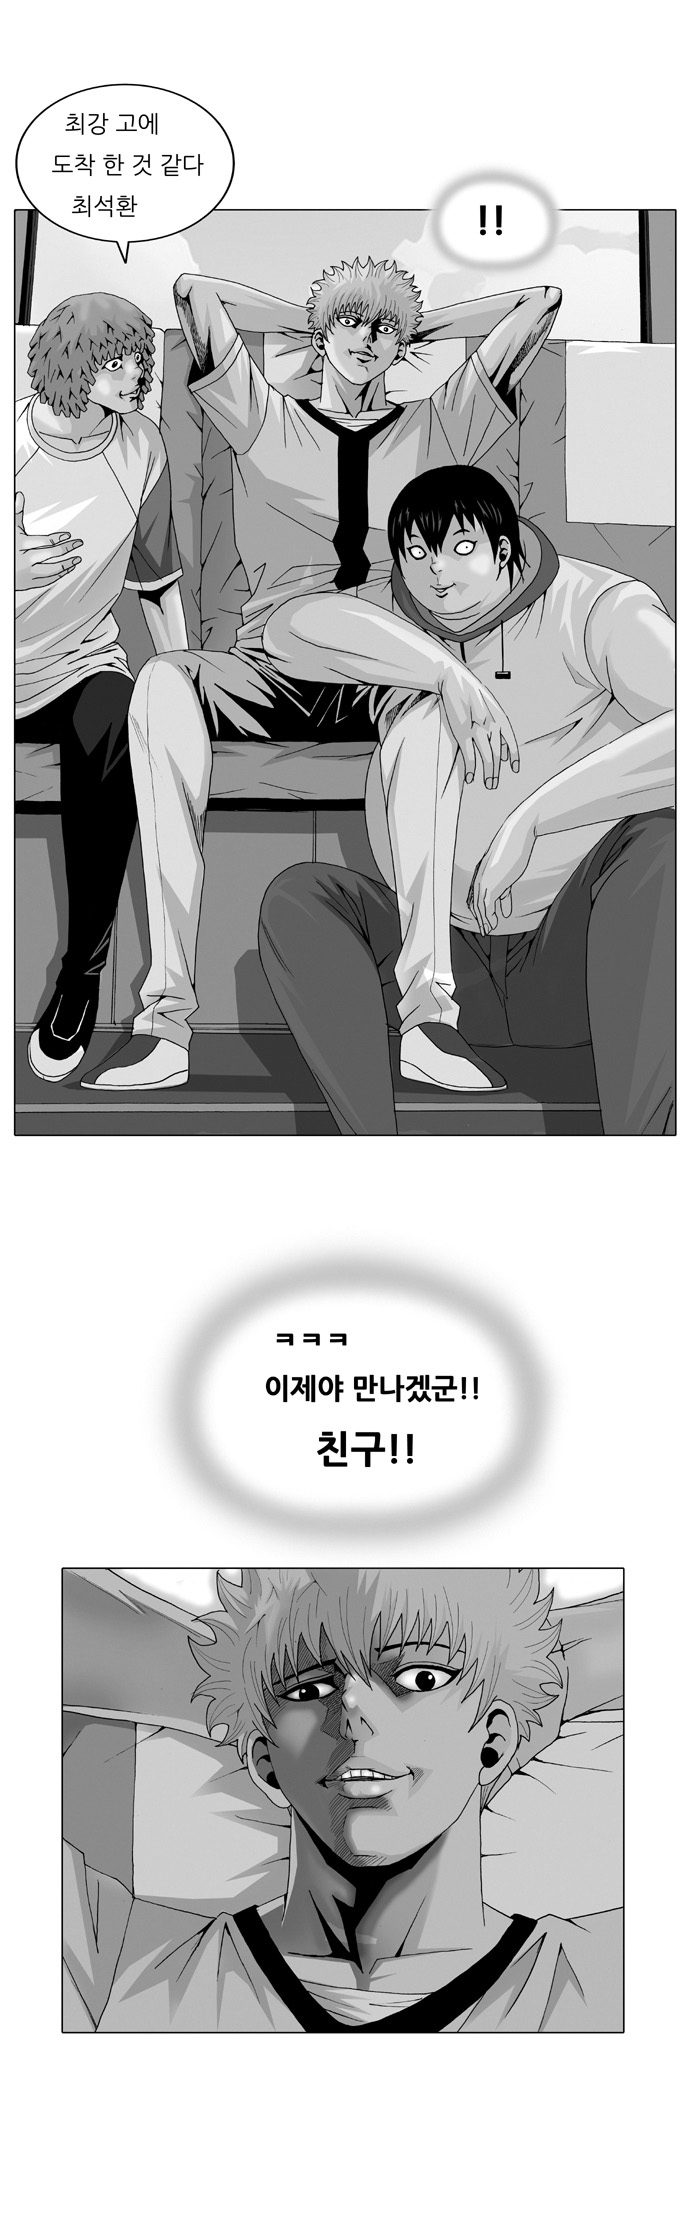 Ultimate Legend - Kang Hae Hyo - Chapter 31 - Page 1